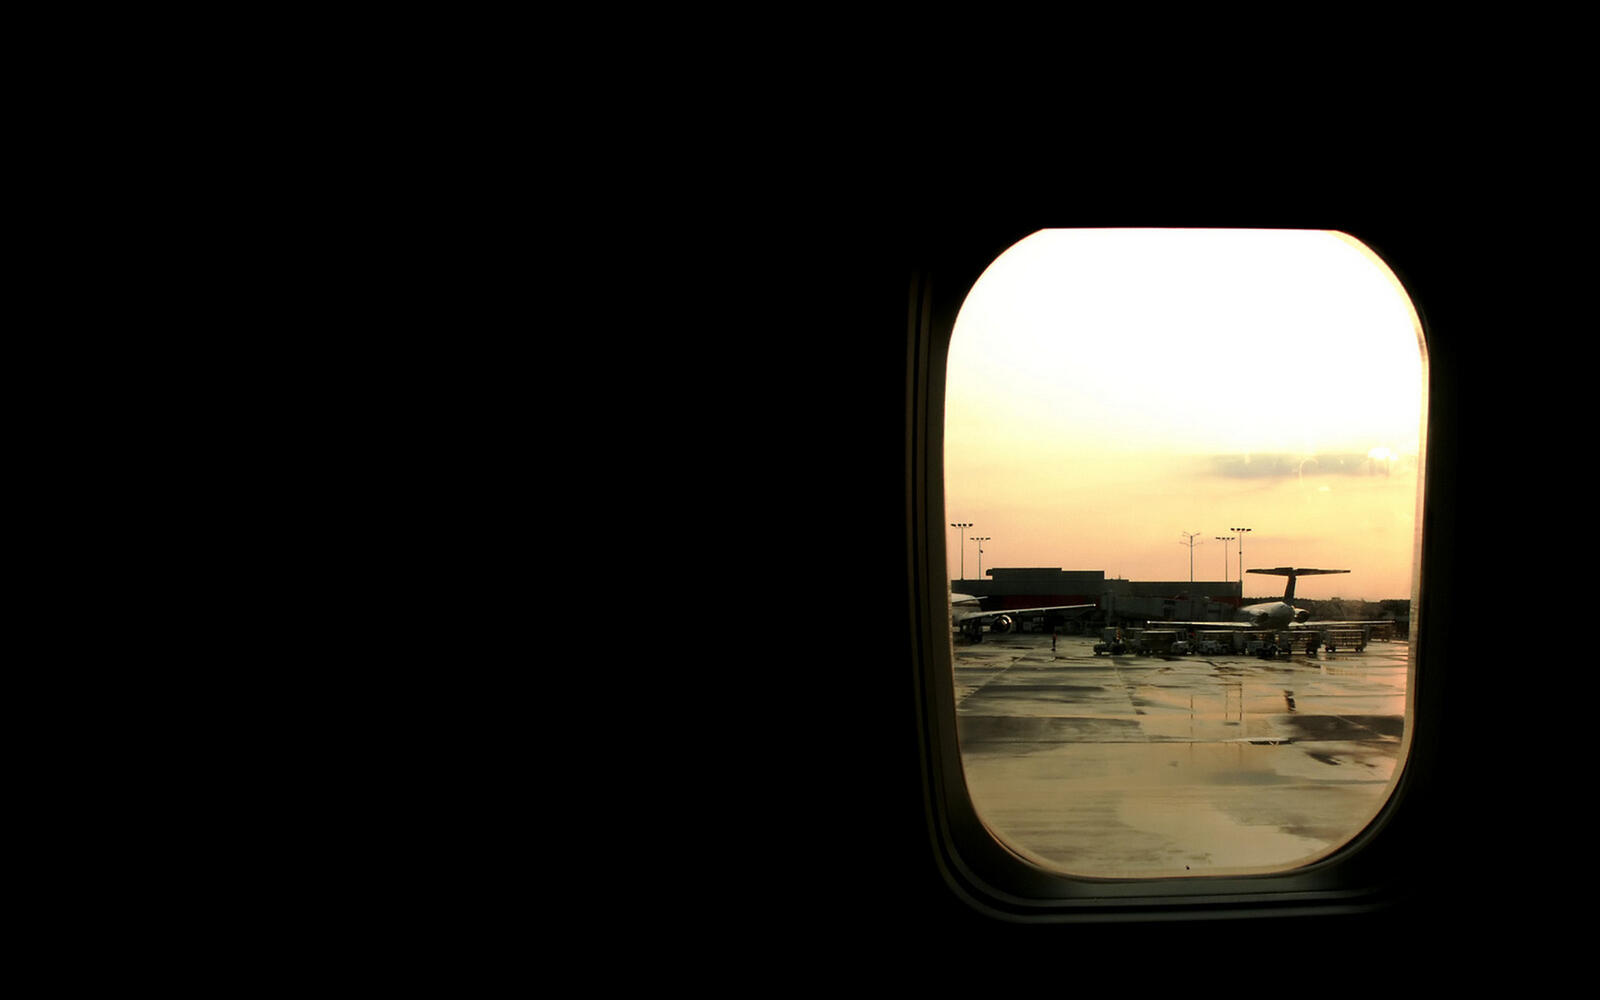 Wallpapers airplane porthole view on the desktop